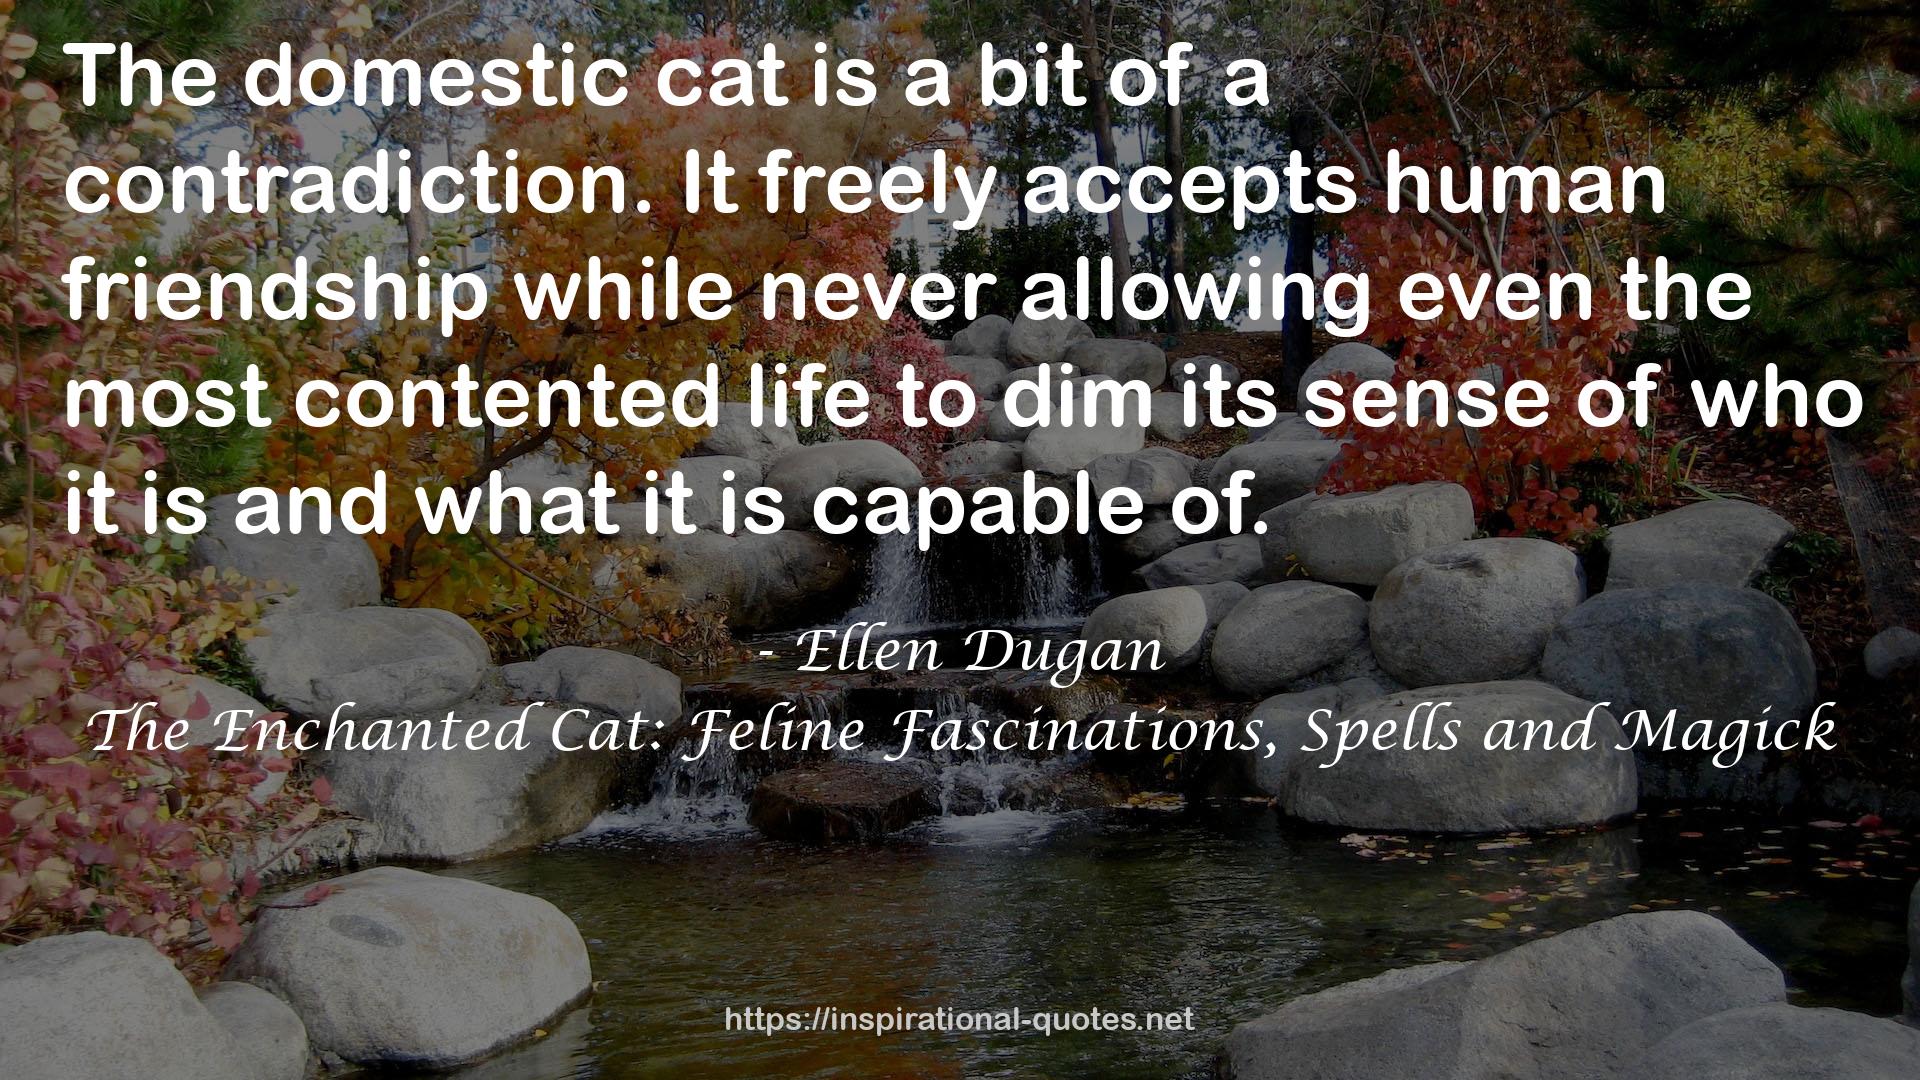 The Enchanted Cat: Feline Fascinations, Spells and Magick QUOTES